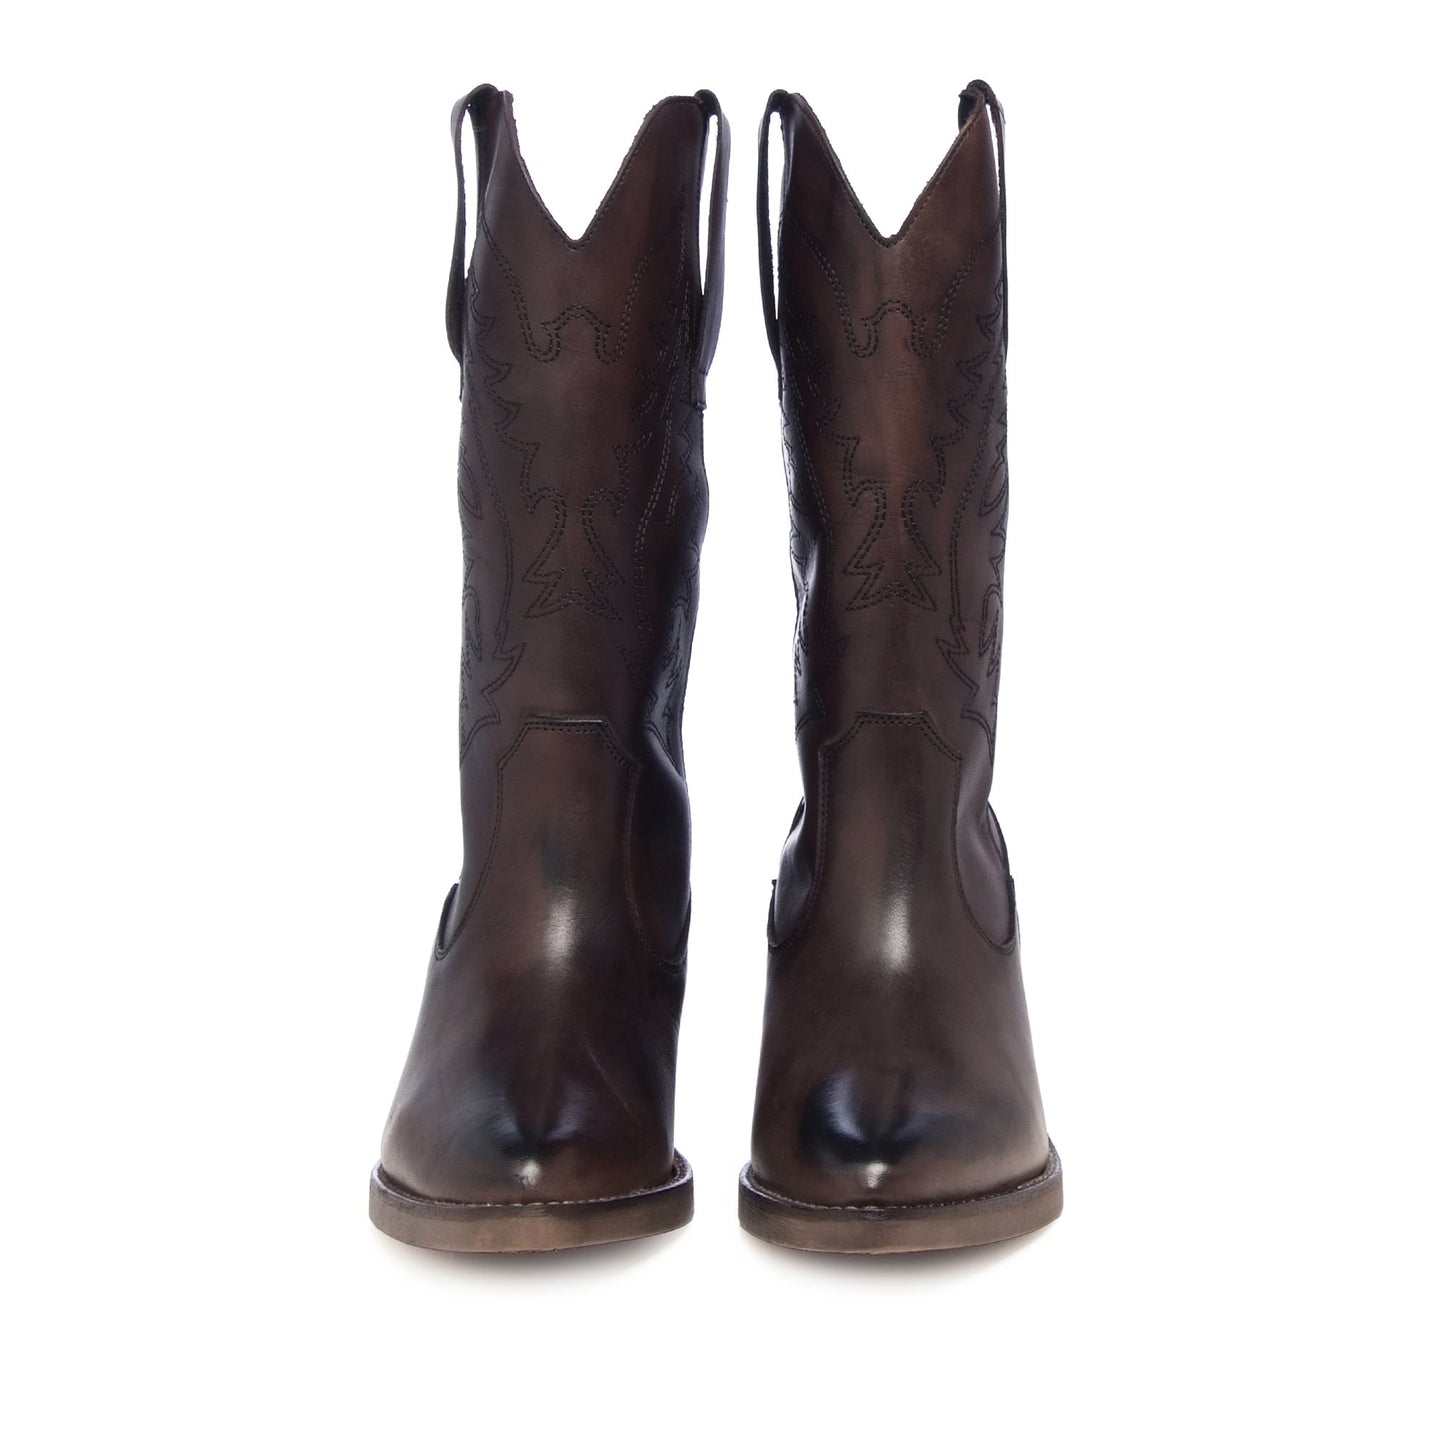 Chocolate Texan Leather Boots